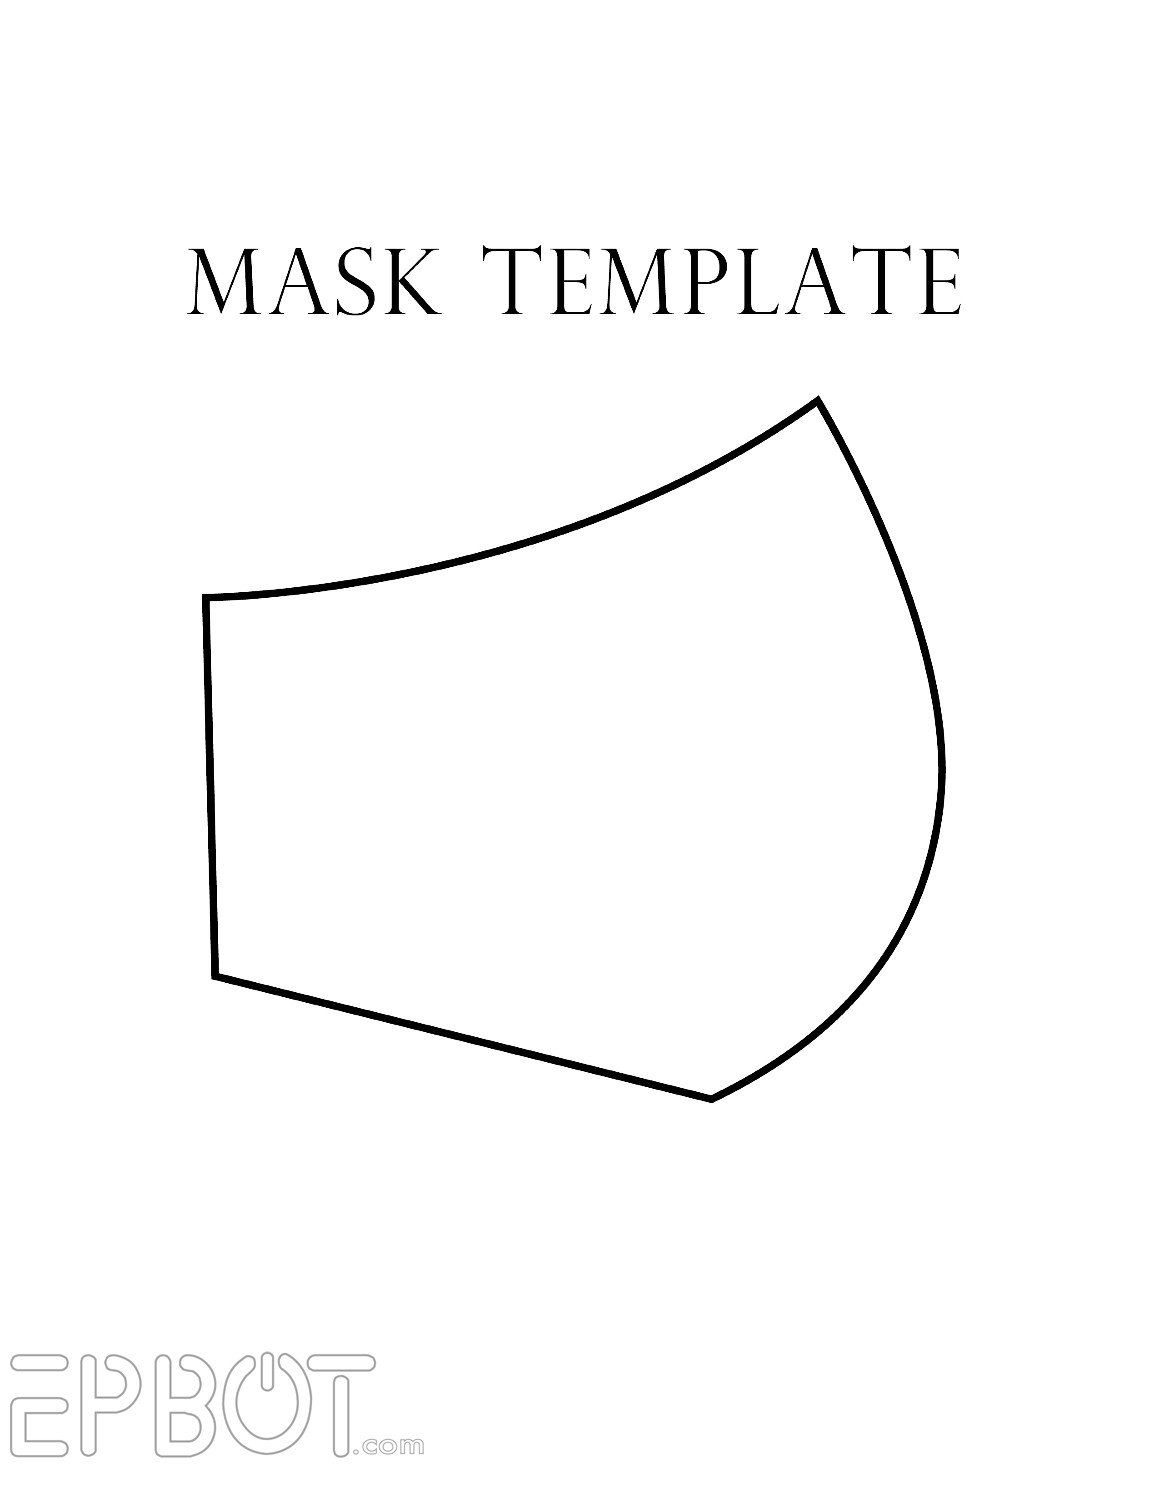 EPBOT My Faux "Respirator" Mask For Cons Free Template